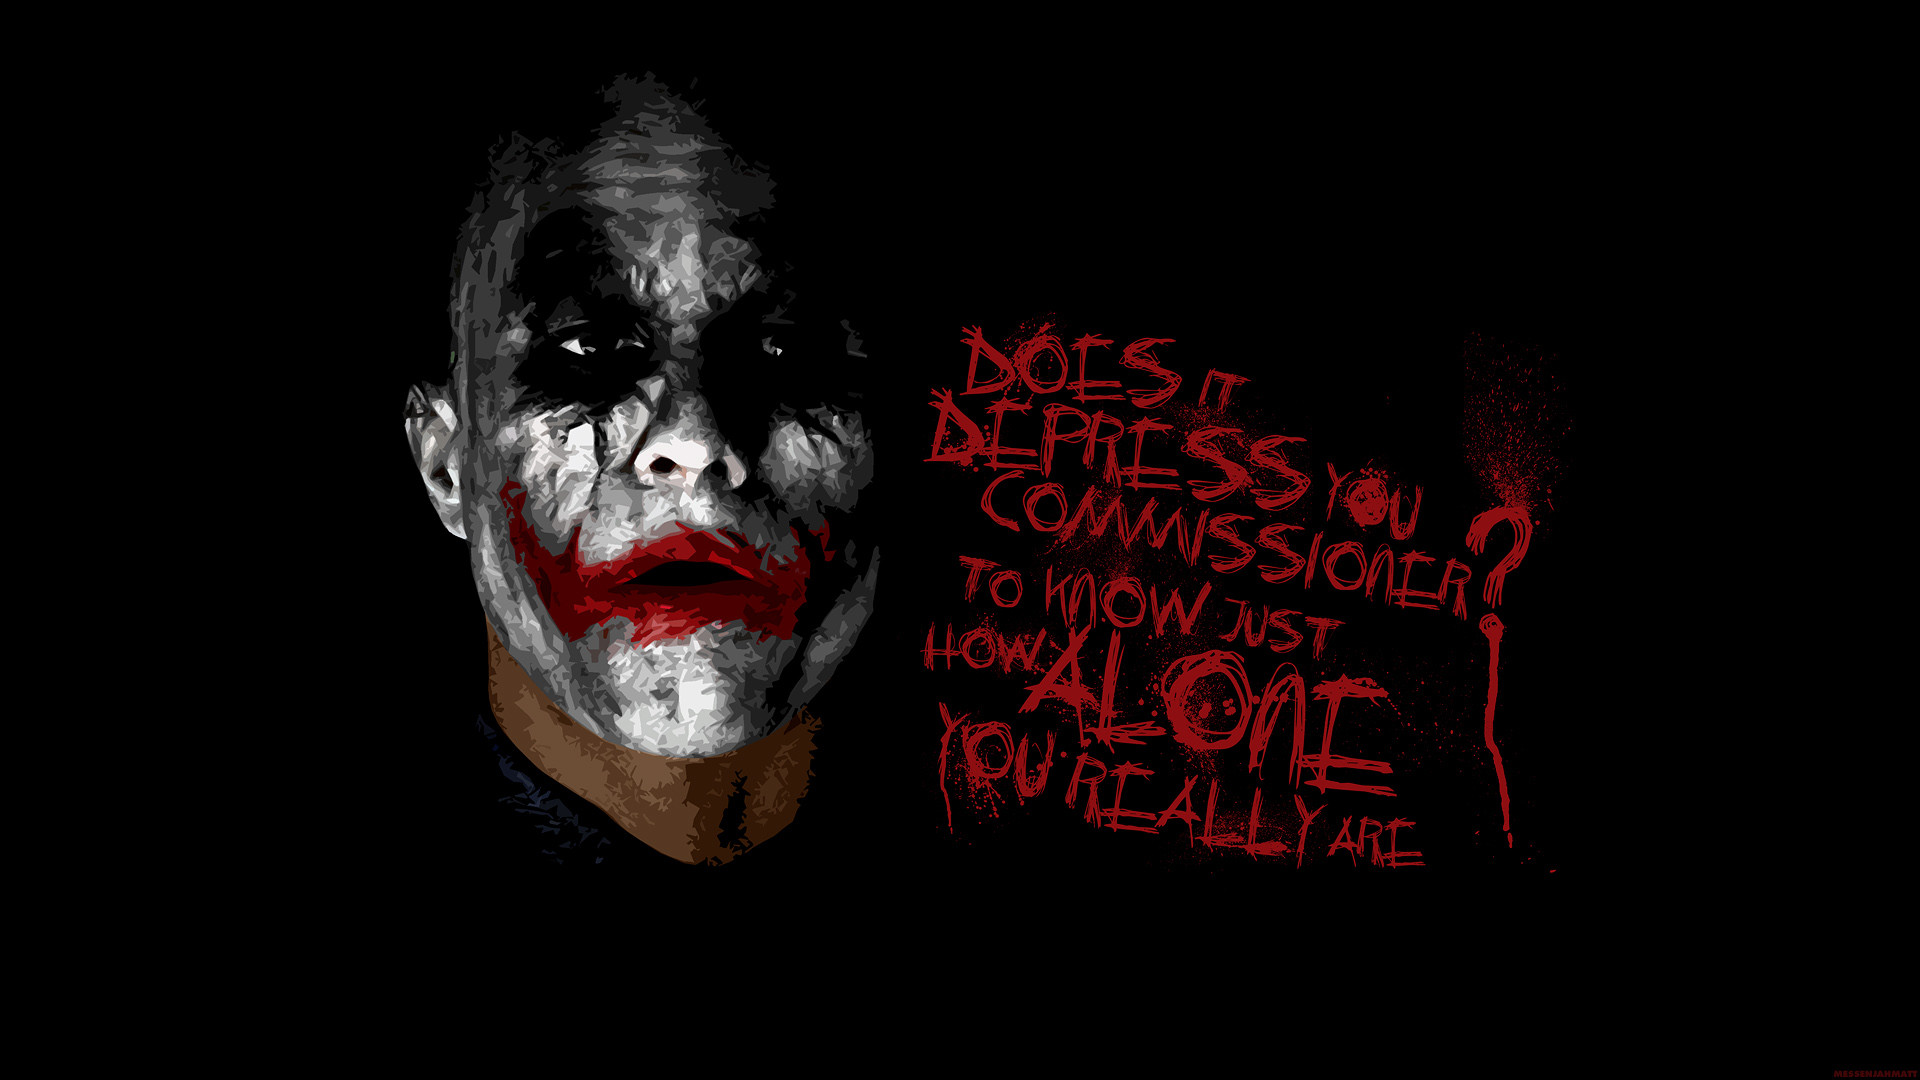 1920x1080 Batman Joker Background HD Wallpapers. For more cool wallpapers, visit:  www.Hdwallpapersbank.com You can download your favorite HD wallpapers here …